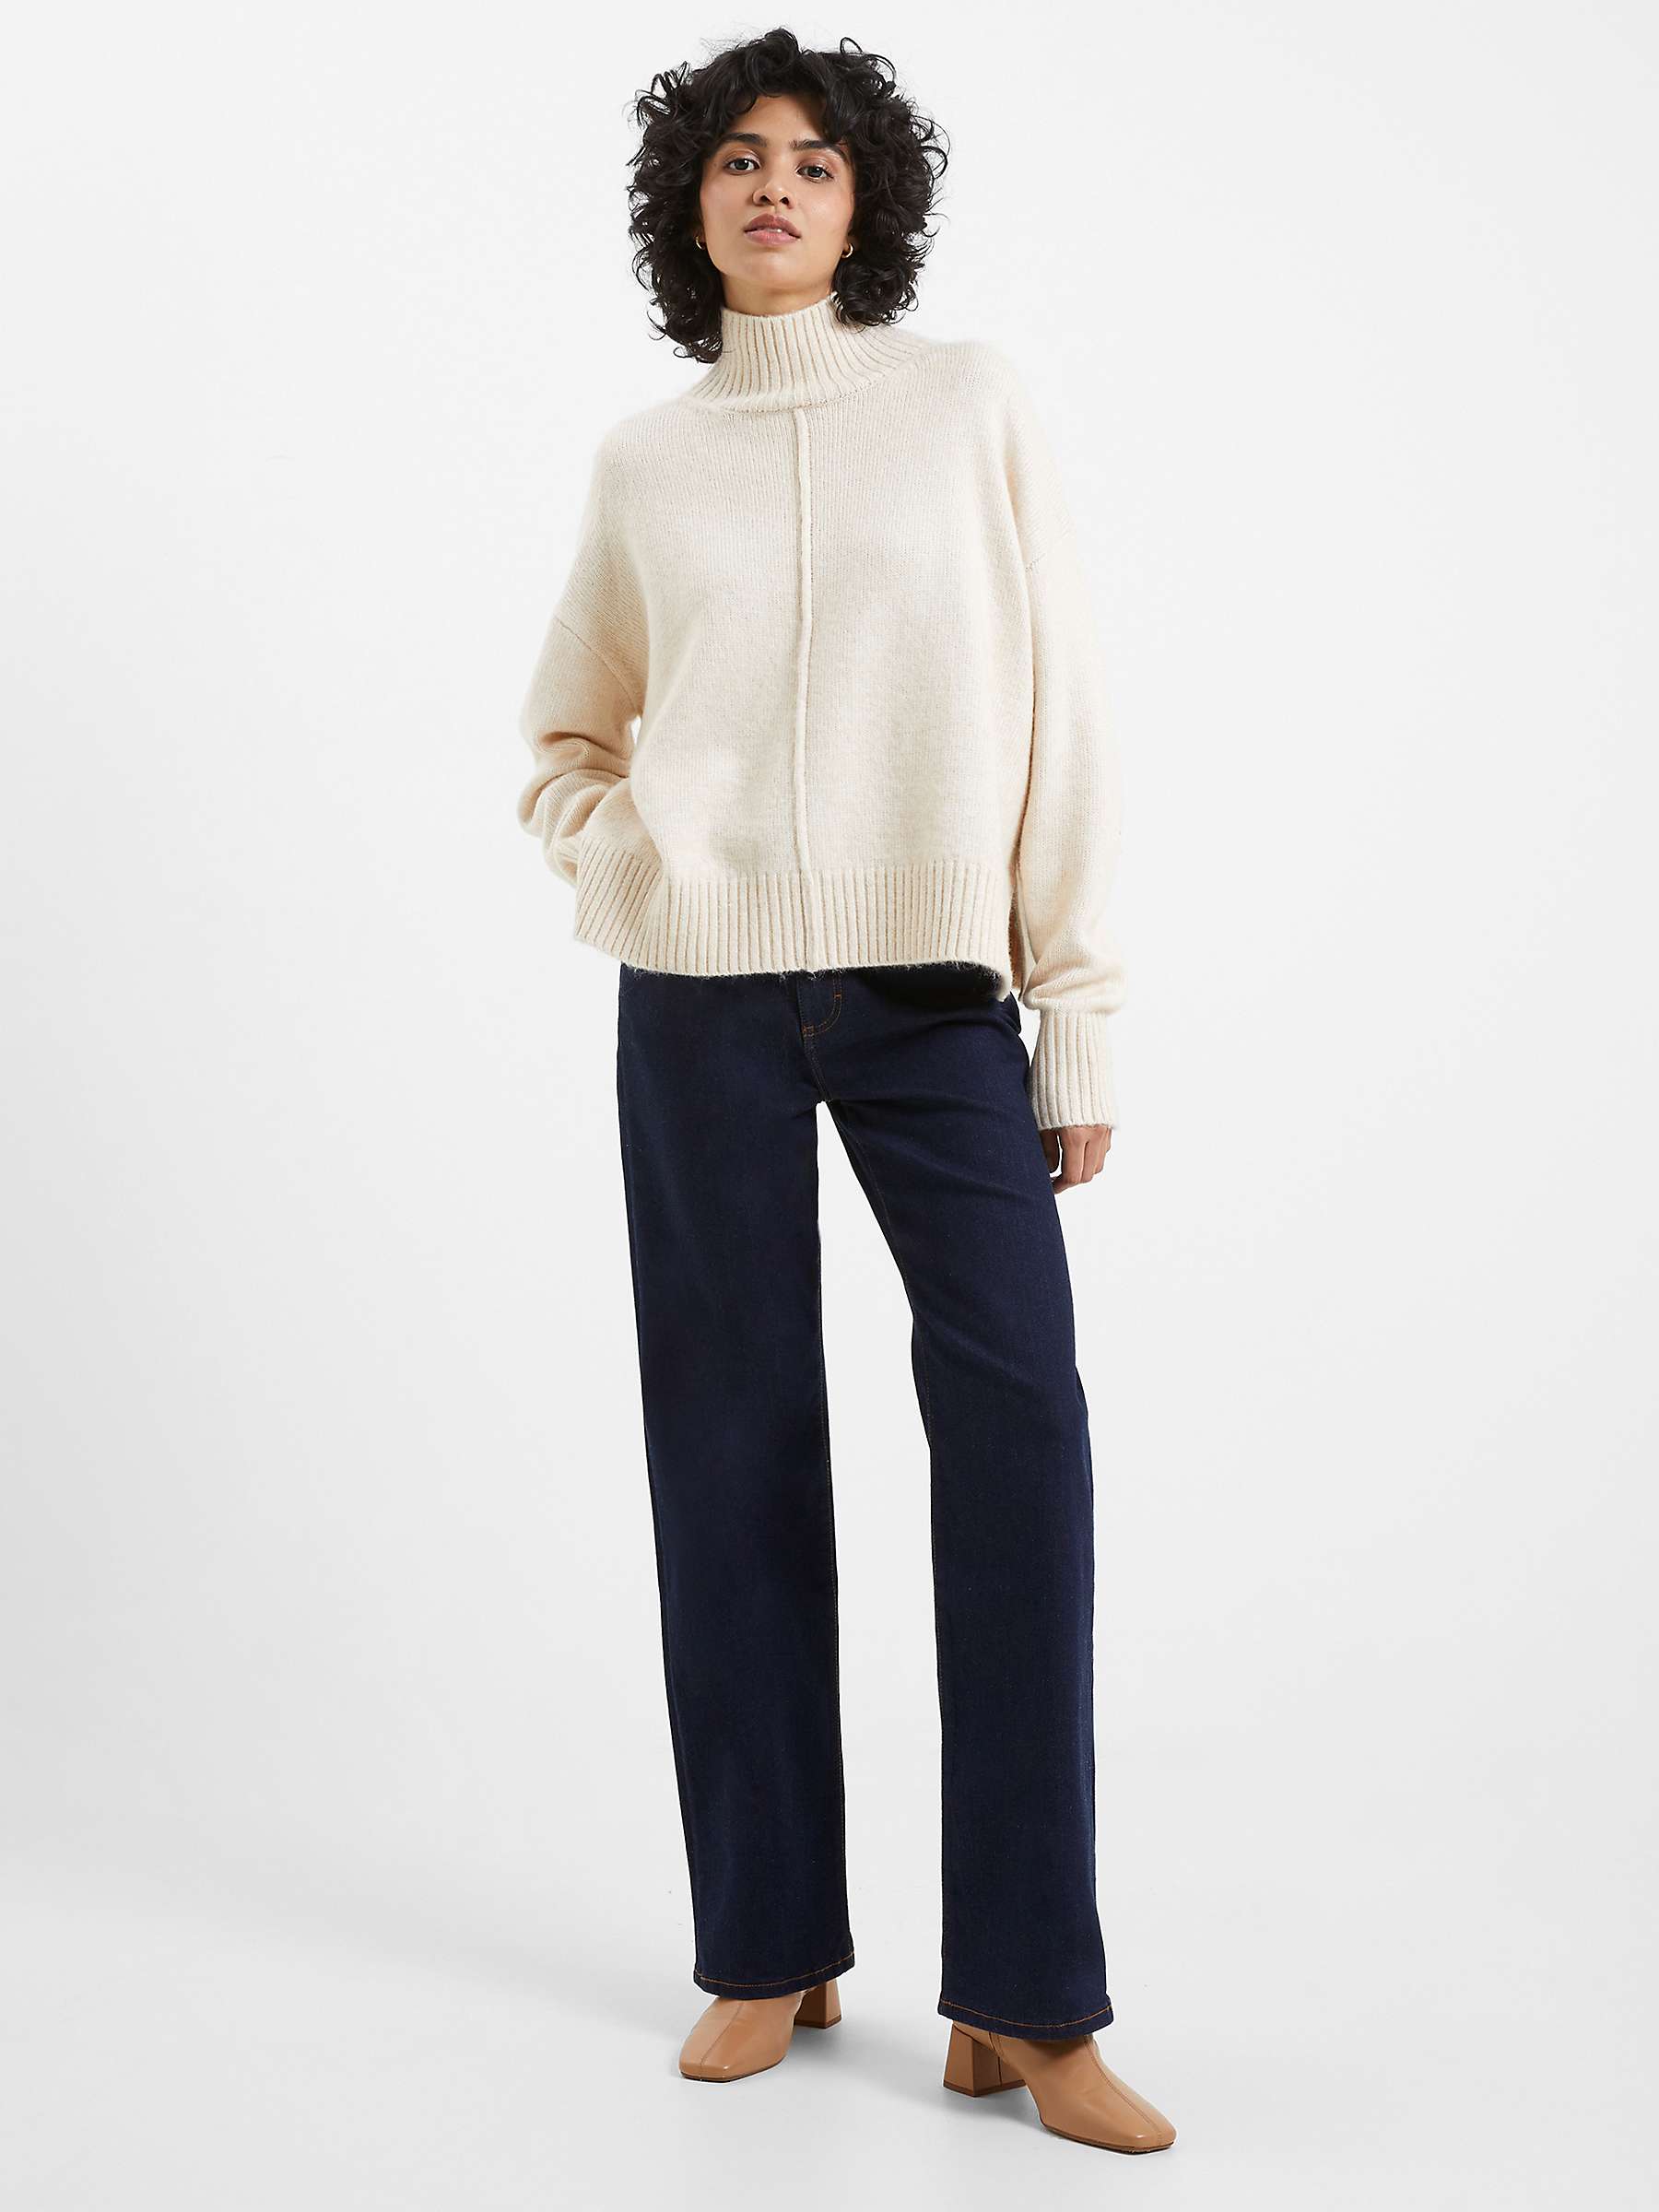 Buy French Connection Kessy Plain Jumper Online at johnlewis.com